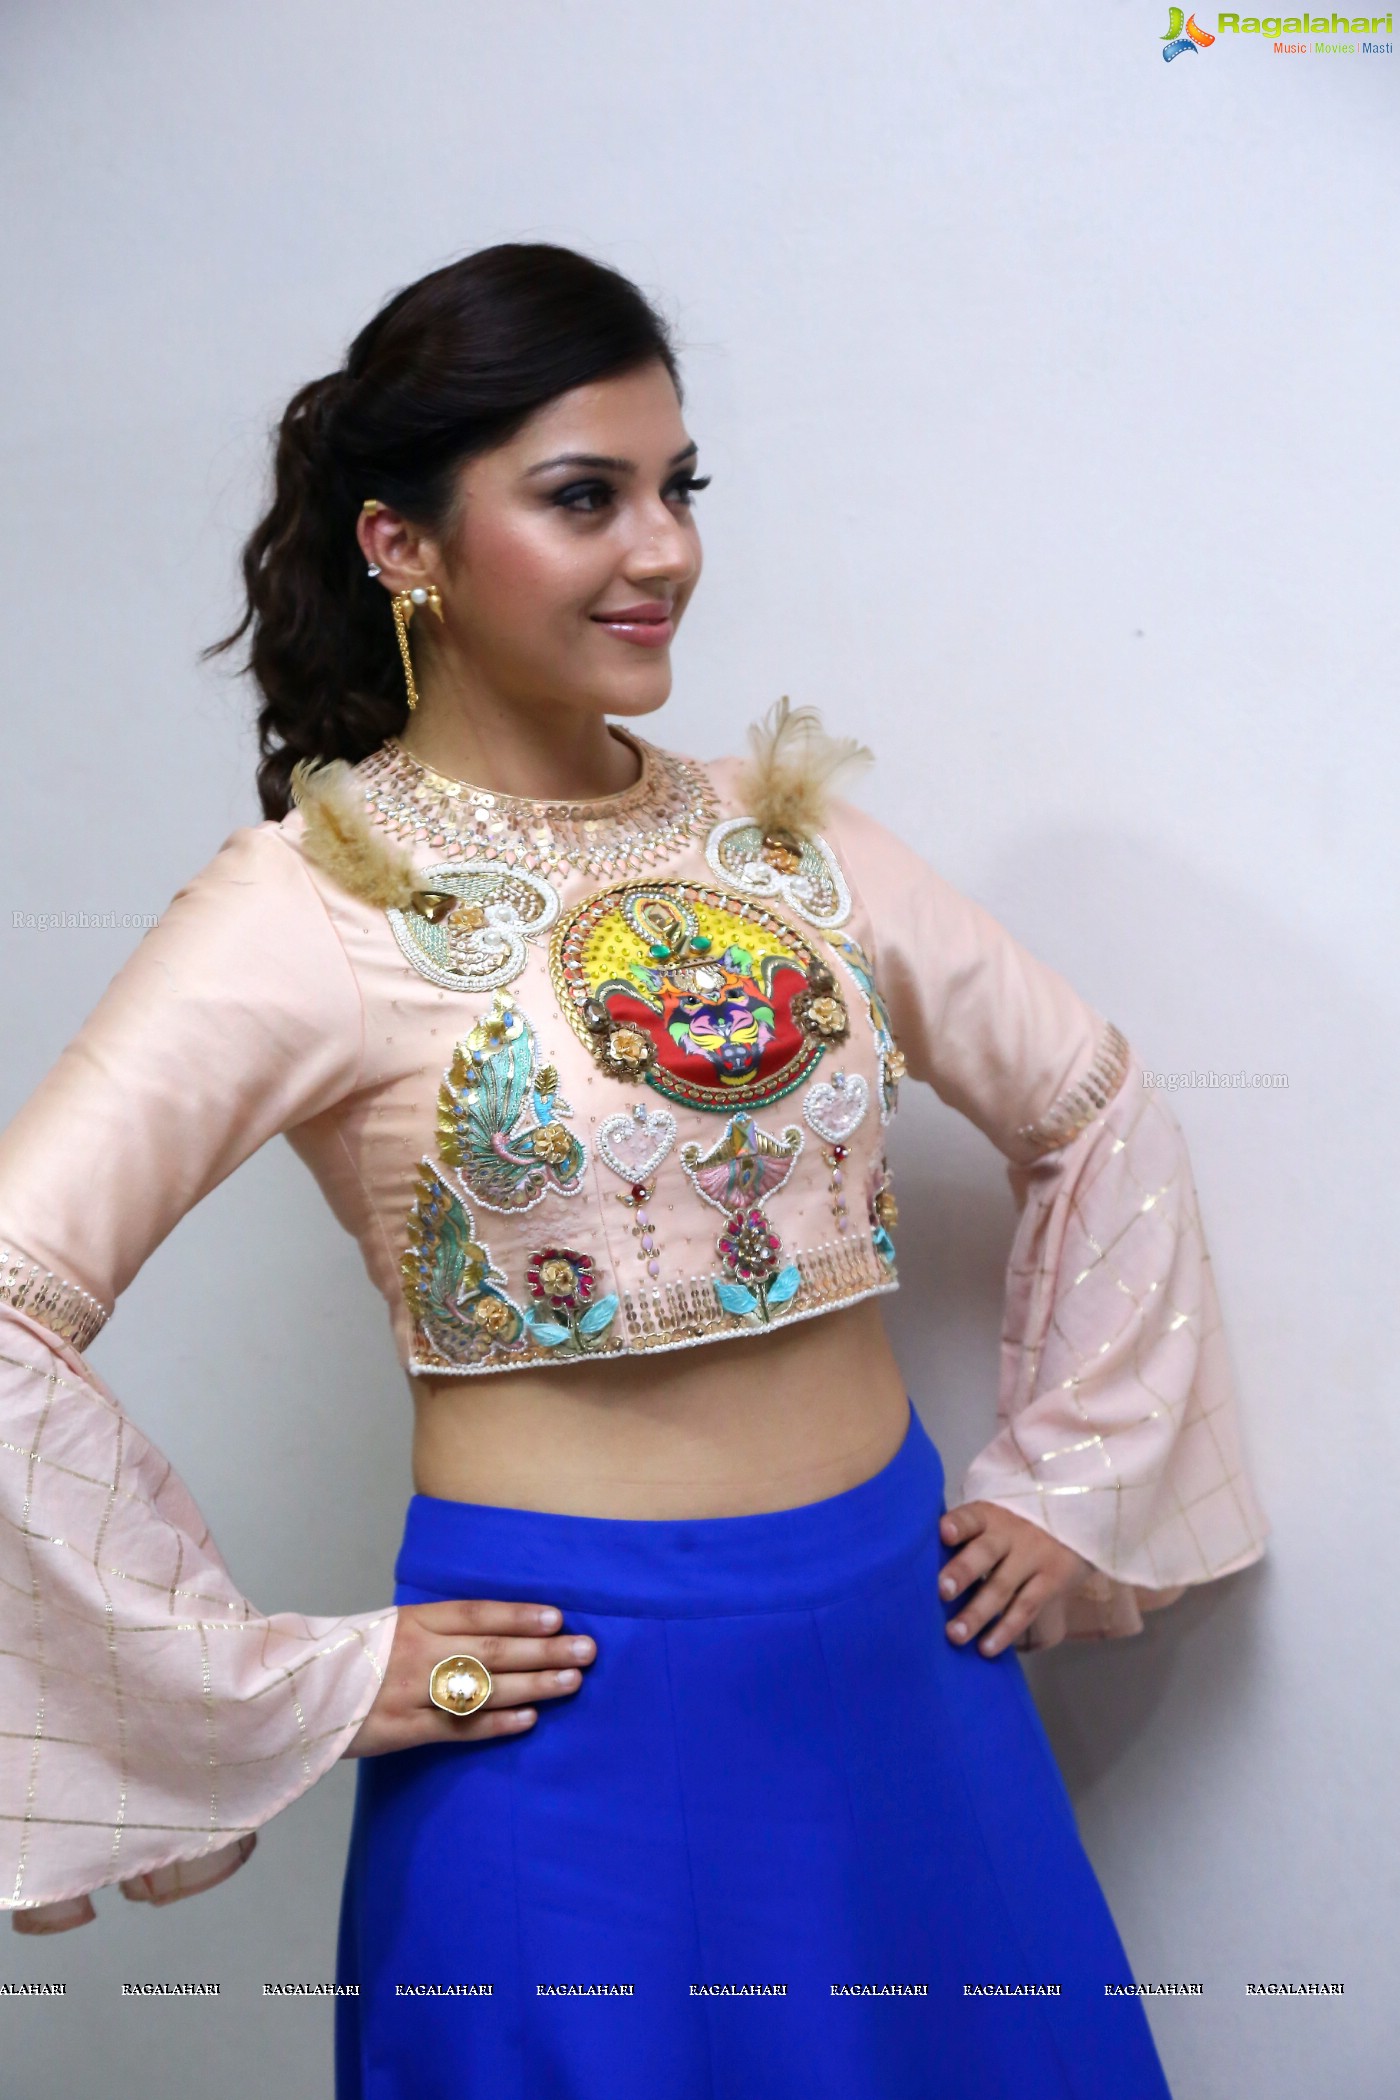 Mehreen Pirzada at Raja The Great Trailer Launch (Posters)